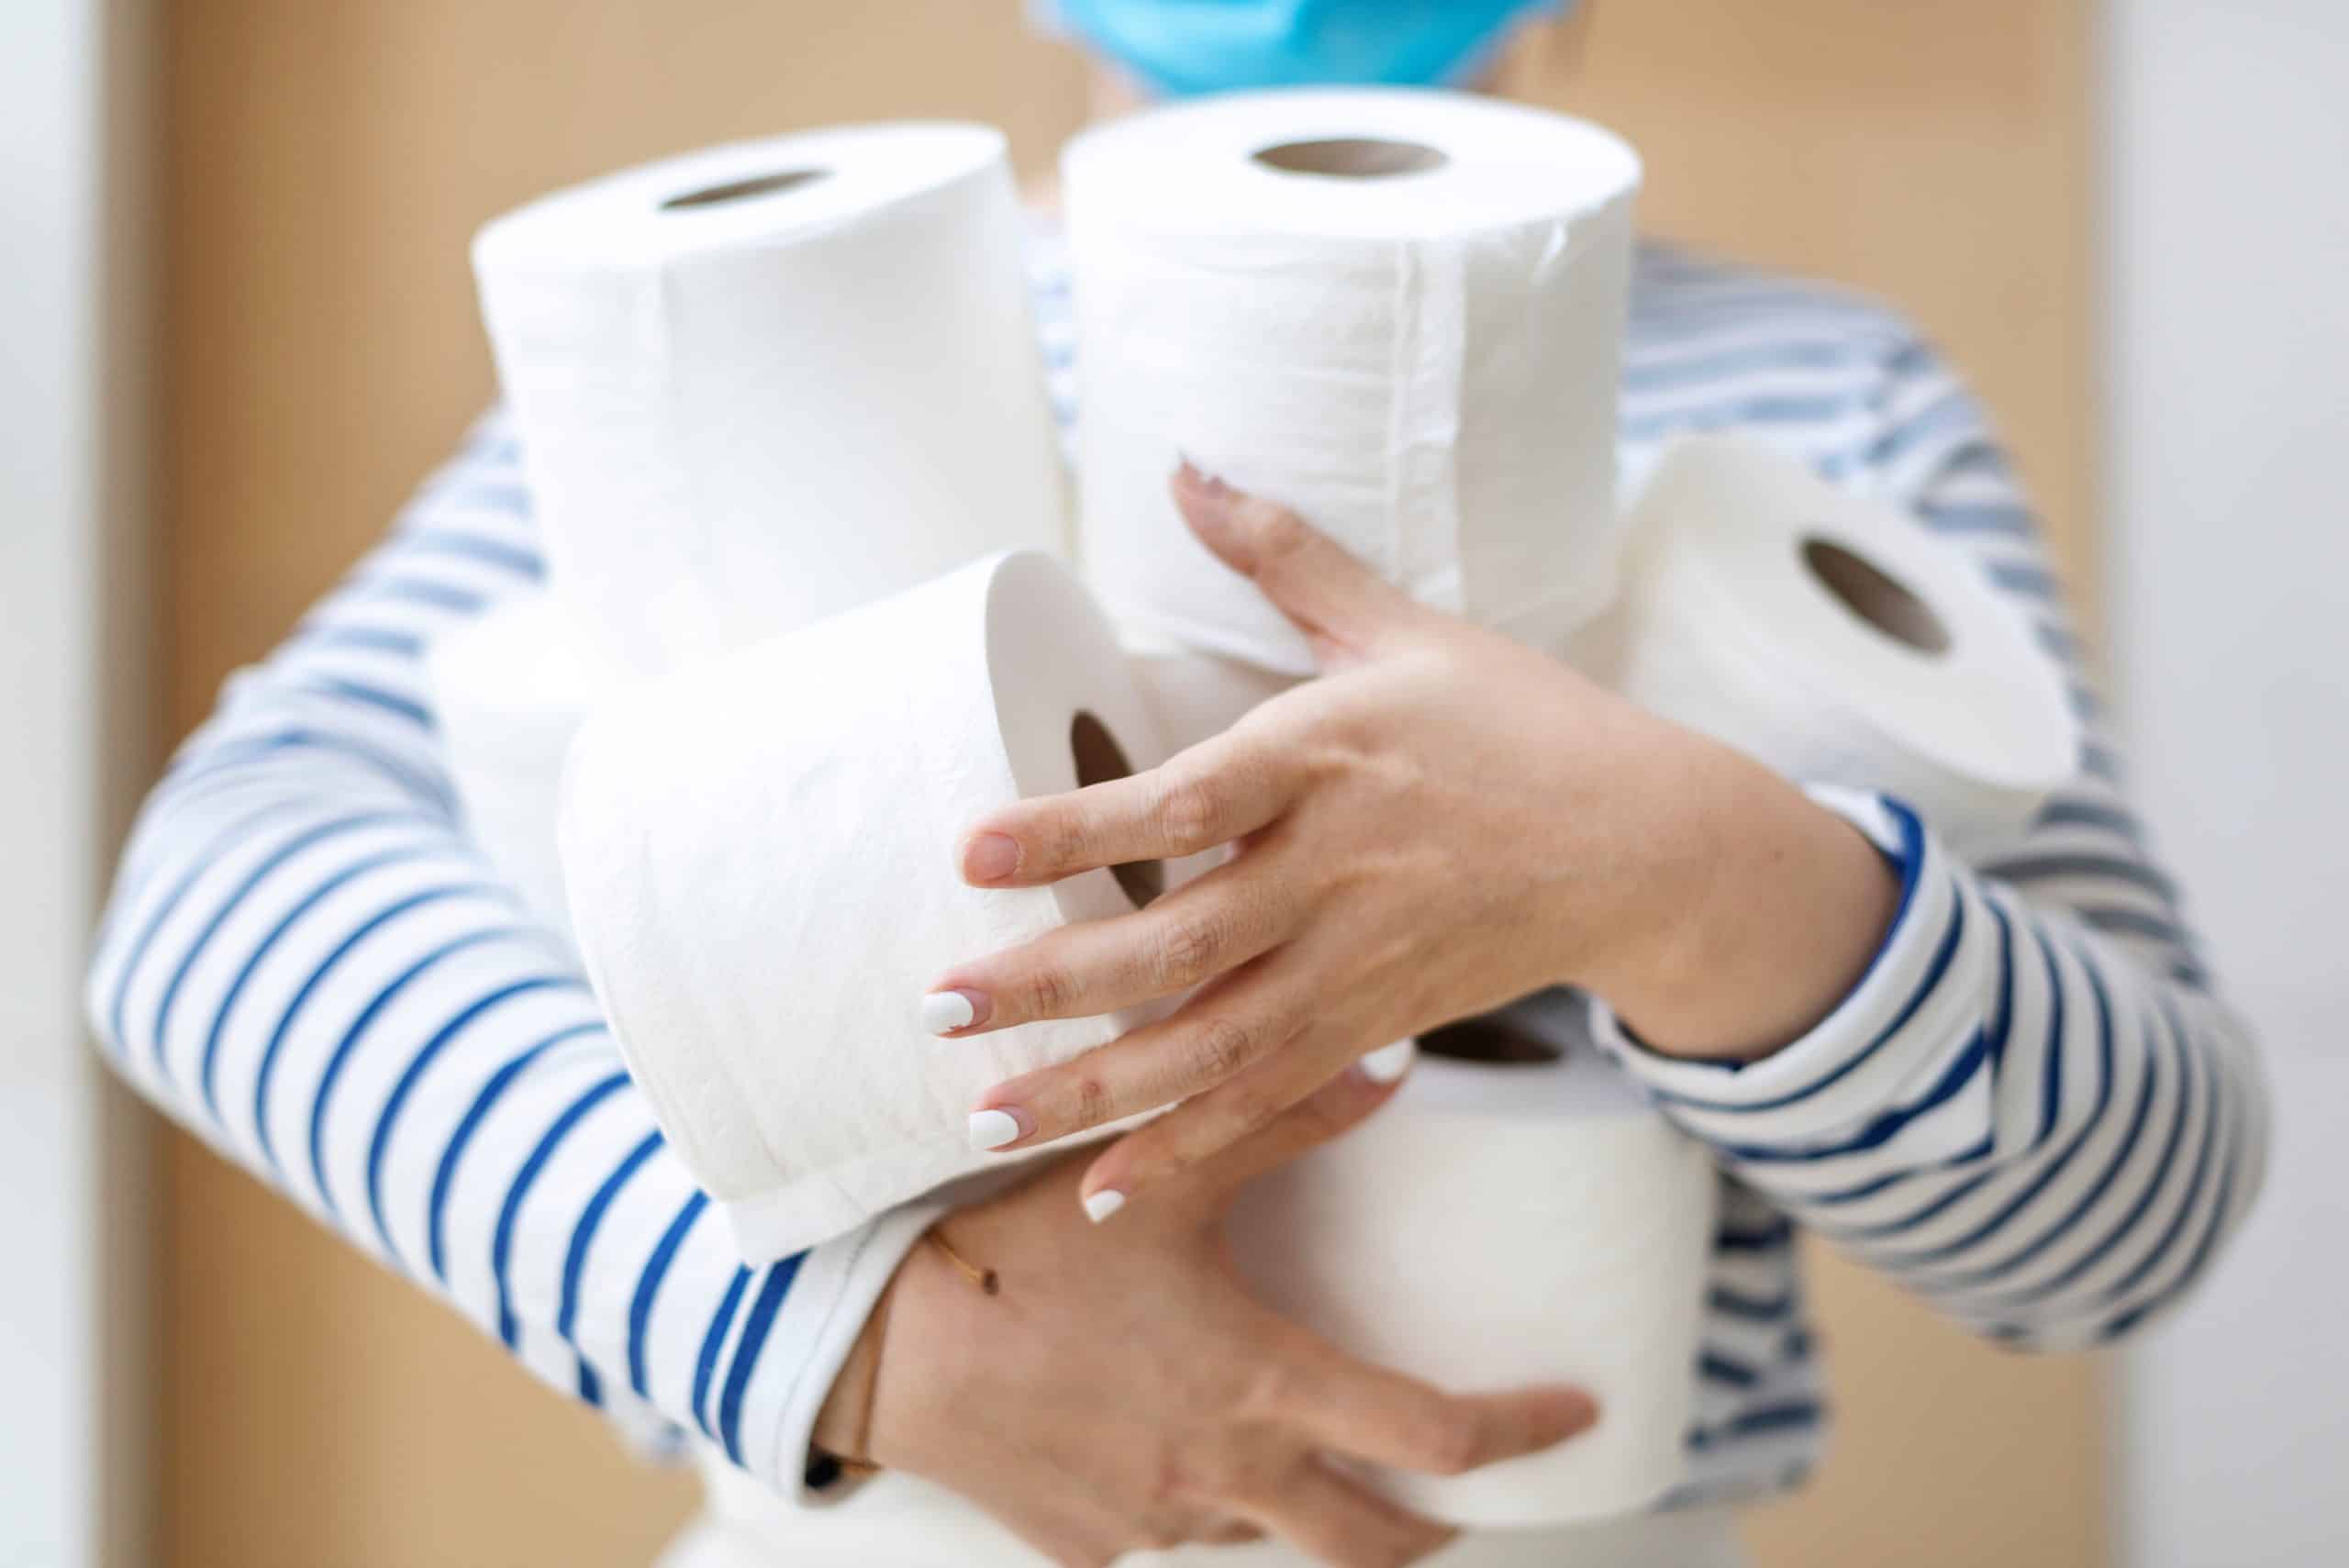 a woman carrying several toilet rolls.